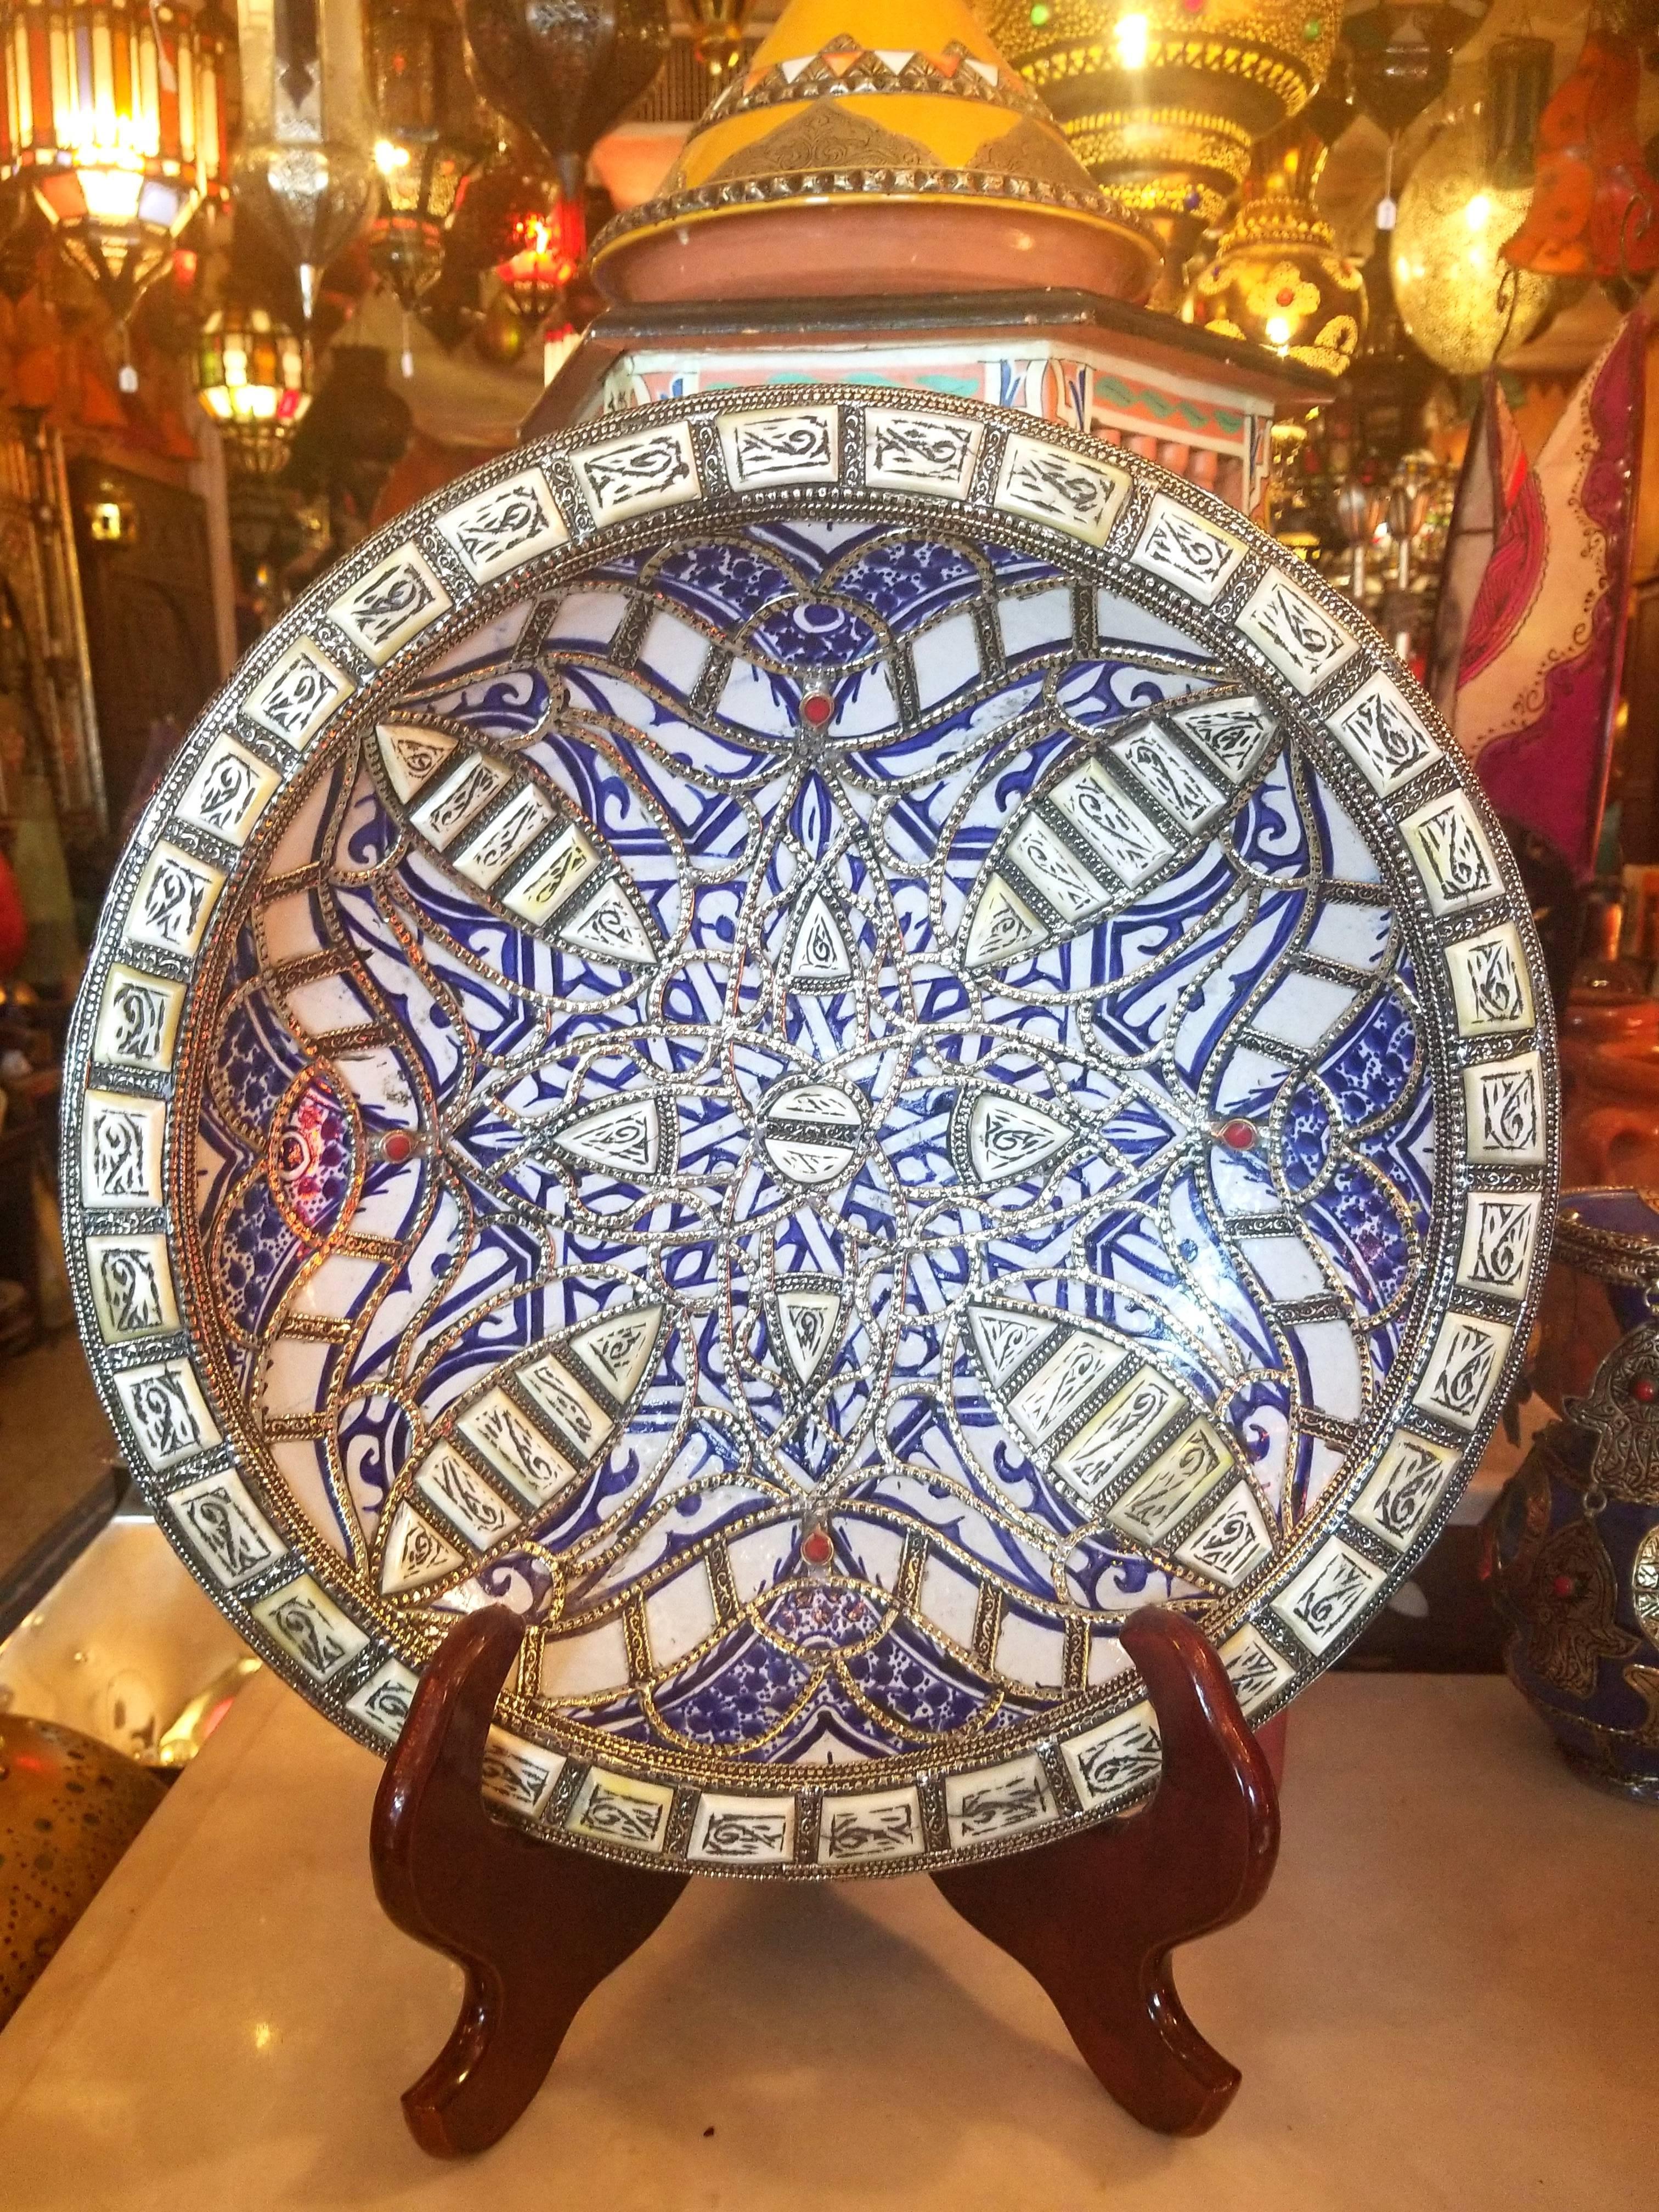 A rare or one of a kind exquisite Moroccan plate / charger for decoration purpose only. This plate is hand-painted in blue and white, and inlaid with metal. Henna dyed Camel bone fragments throughout. This plate would be a great add-on to any décor.